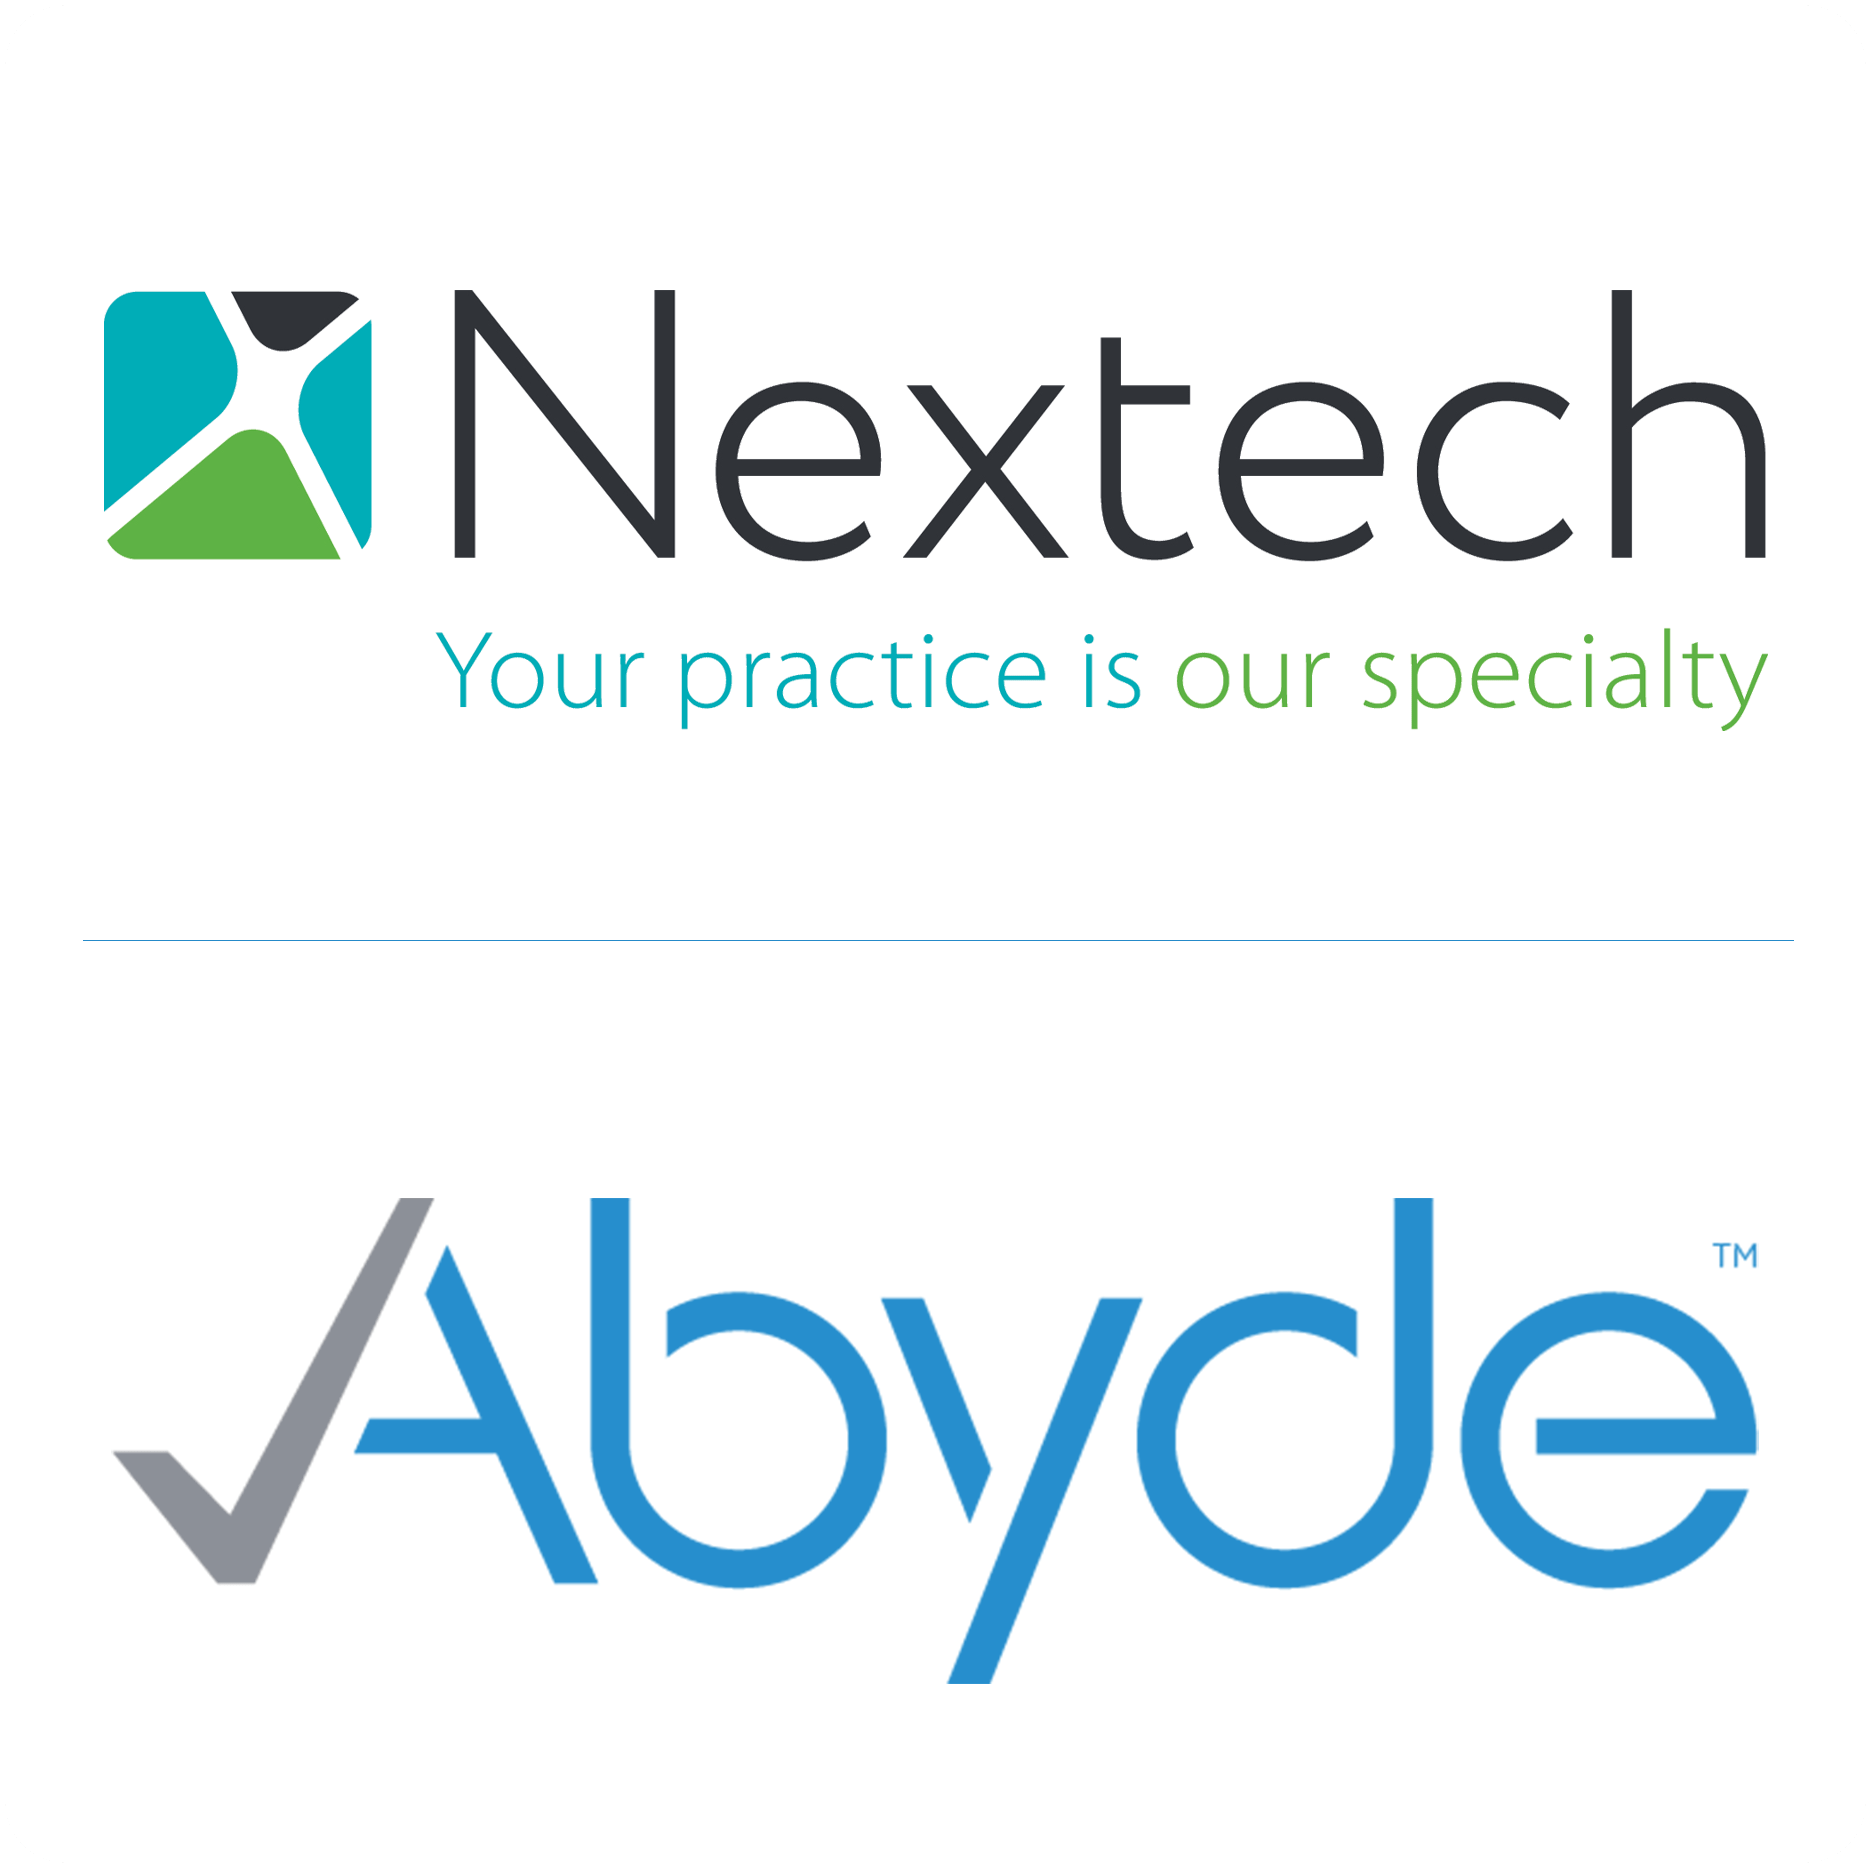 Abyde announces new partnership as Nextech’s exclusive HIPAA compliance solution provider